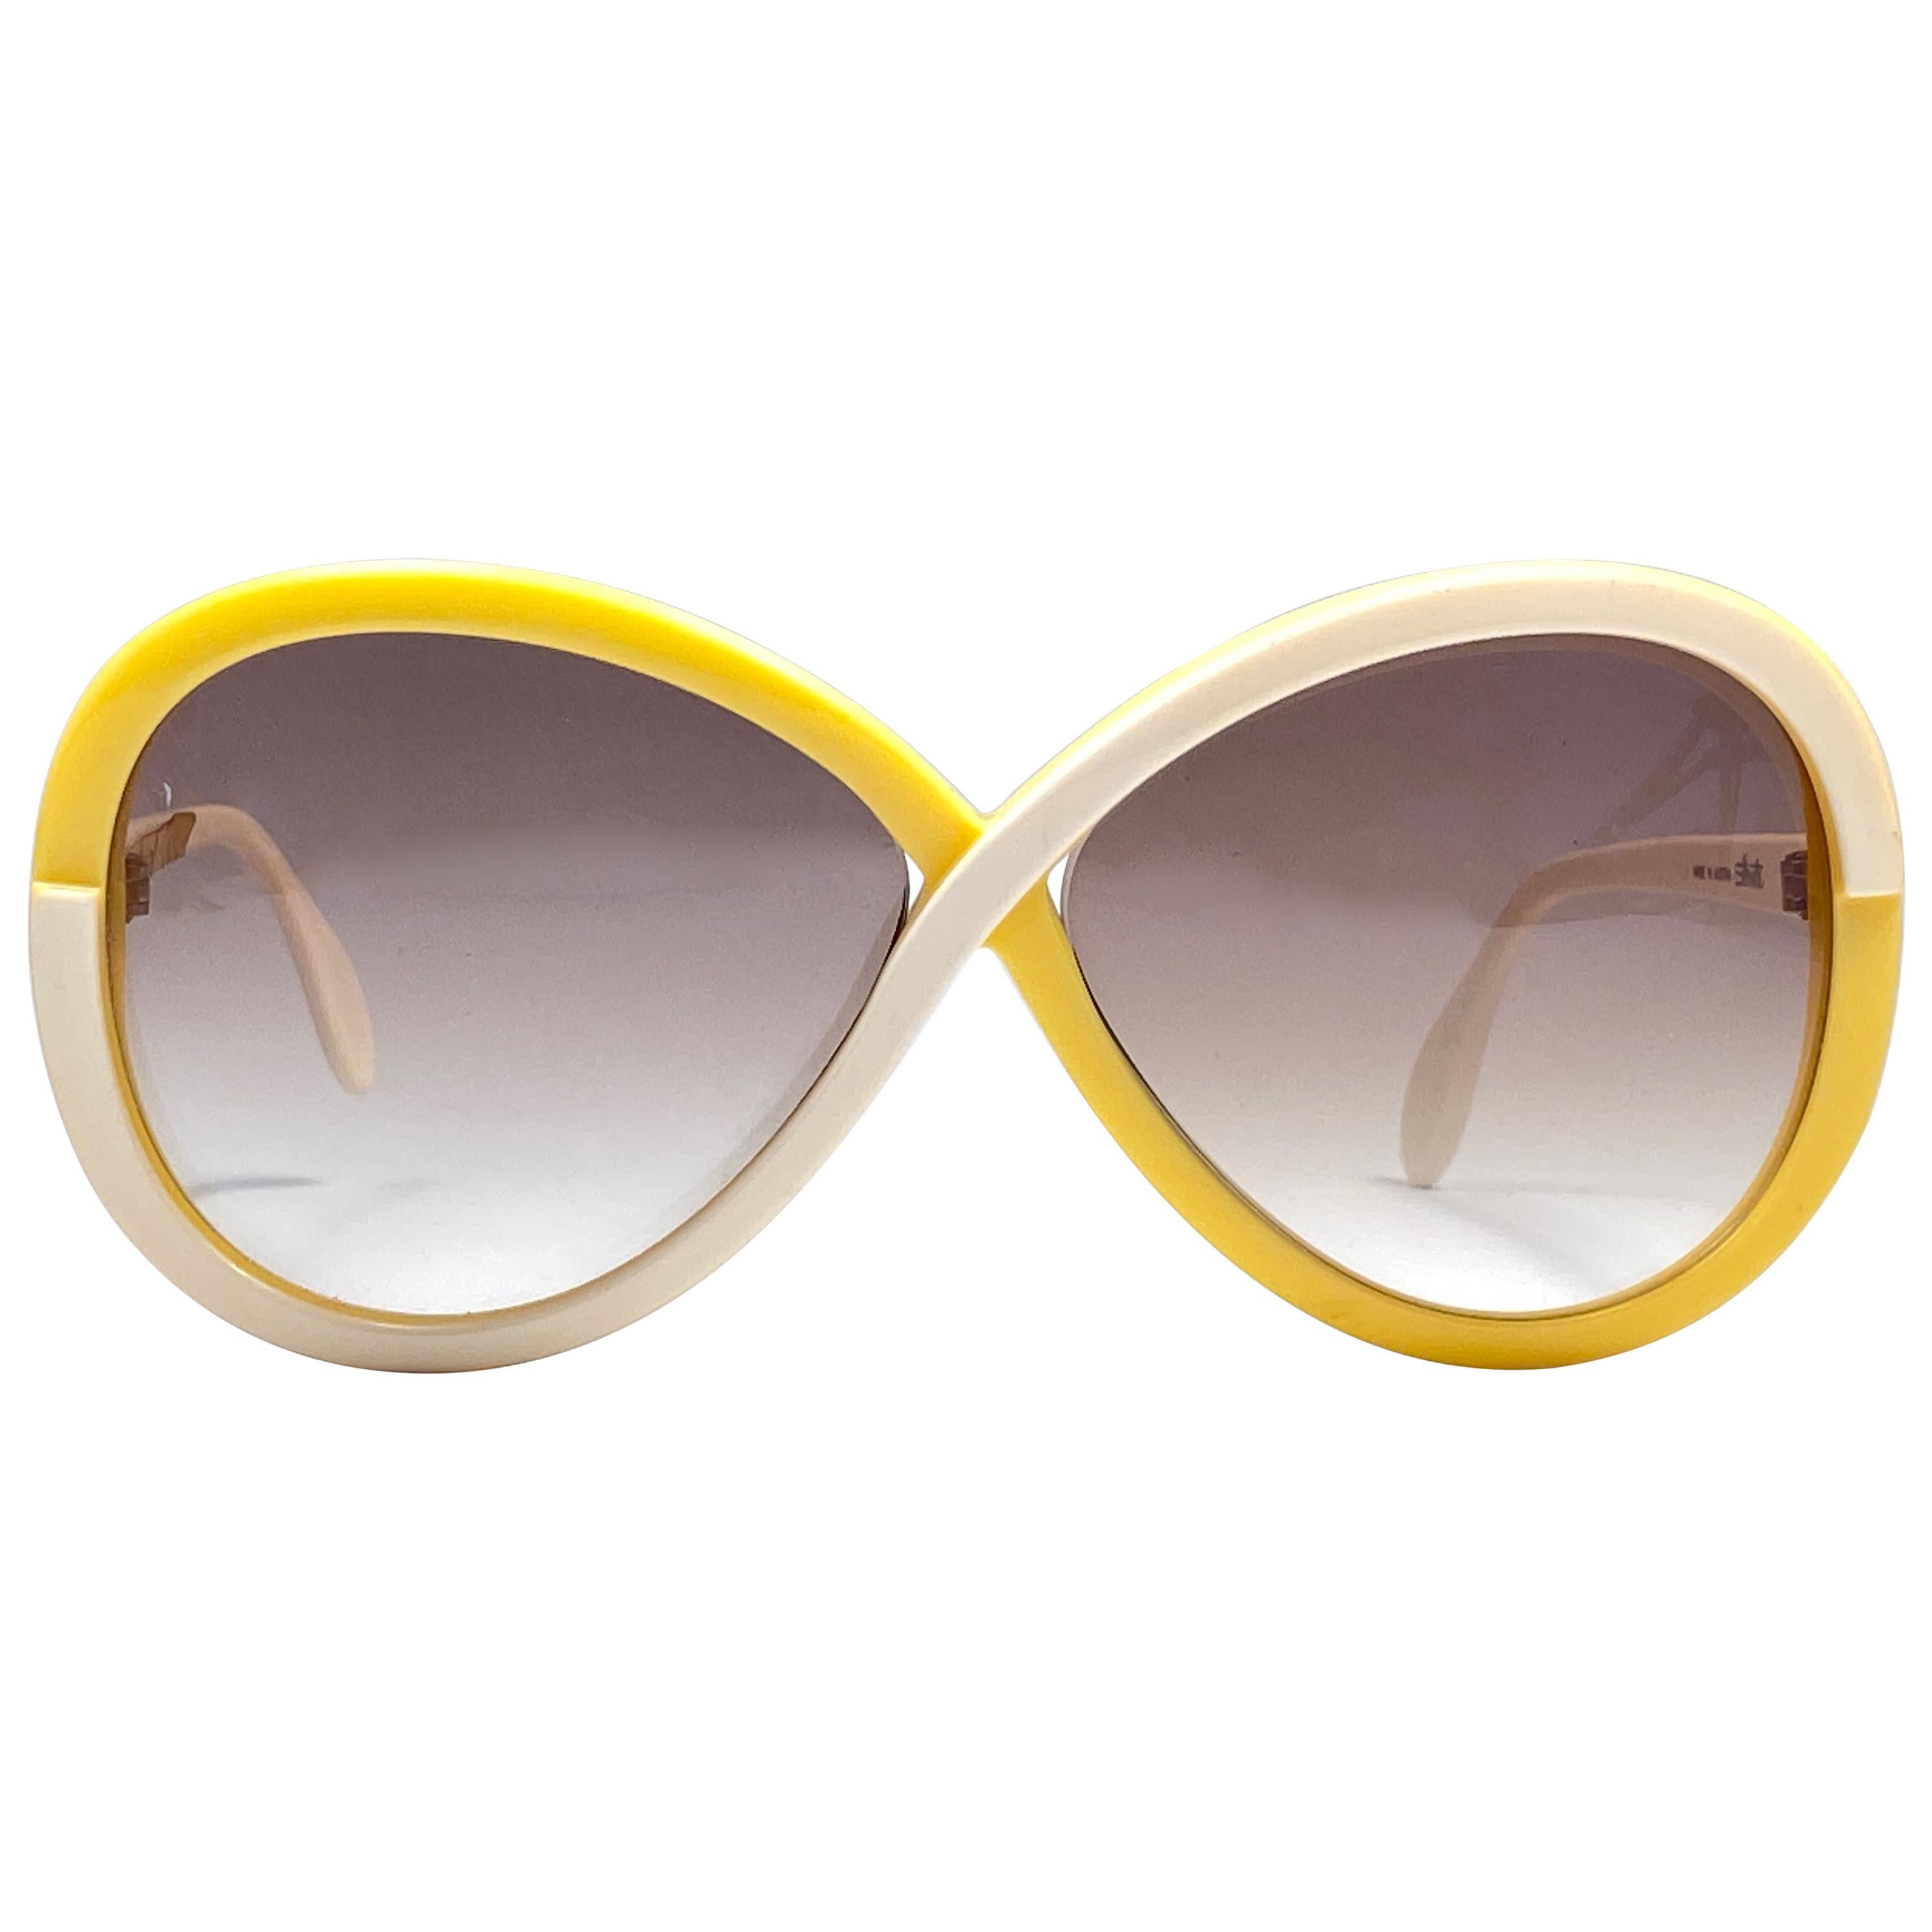 New Vintage Silhouette 3024 Yellow & Beige Funk Germany 1980 Sunglasses 